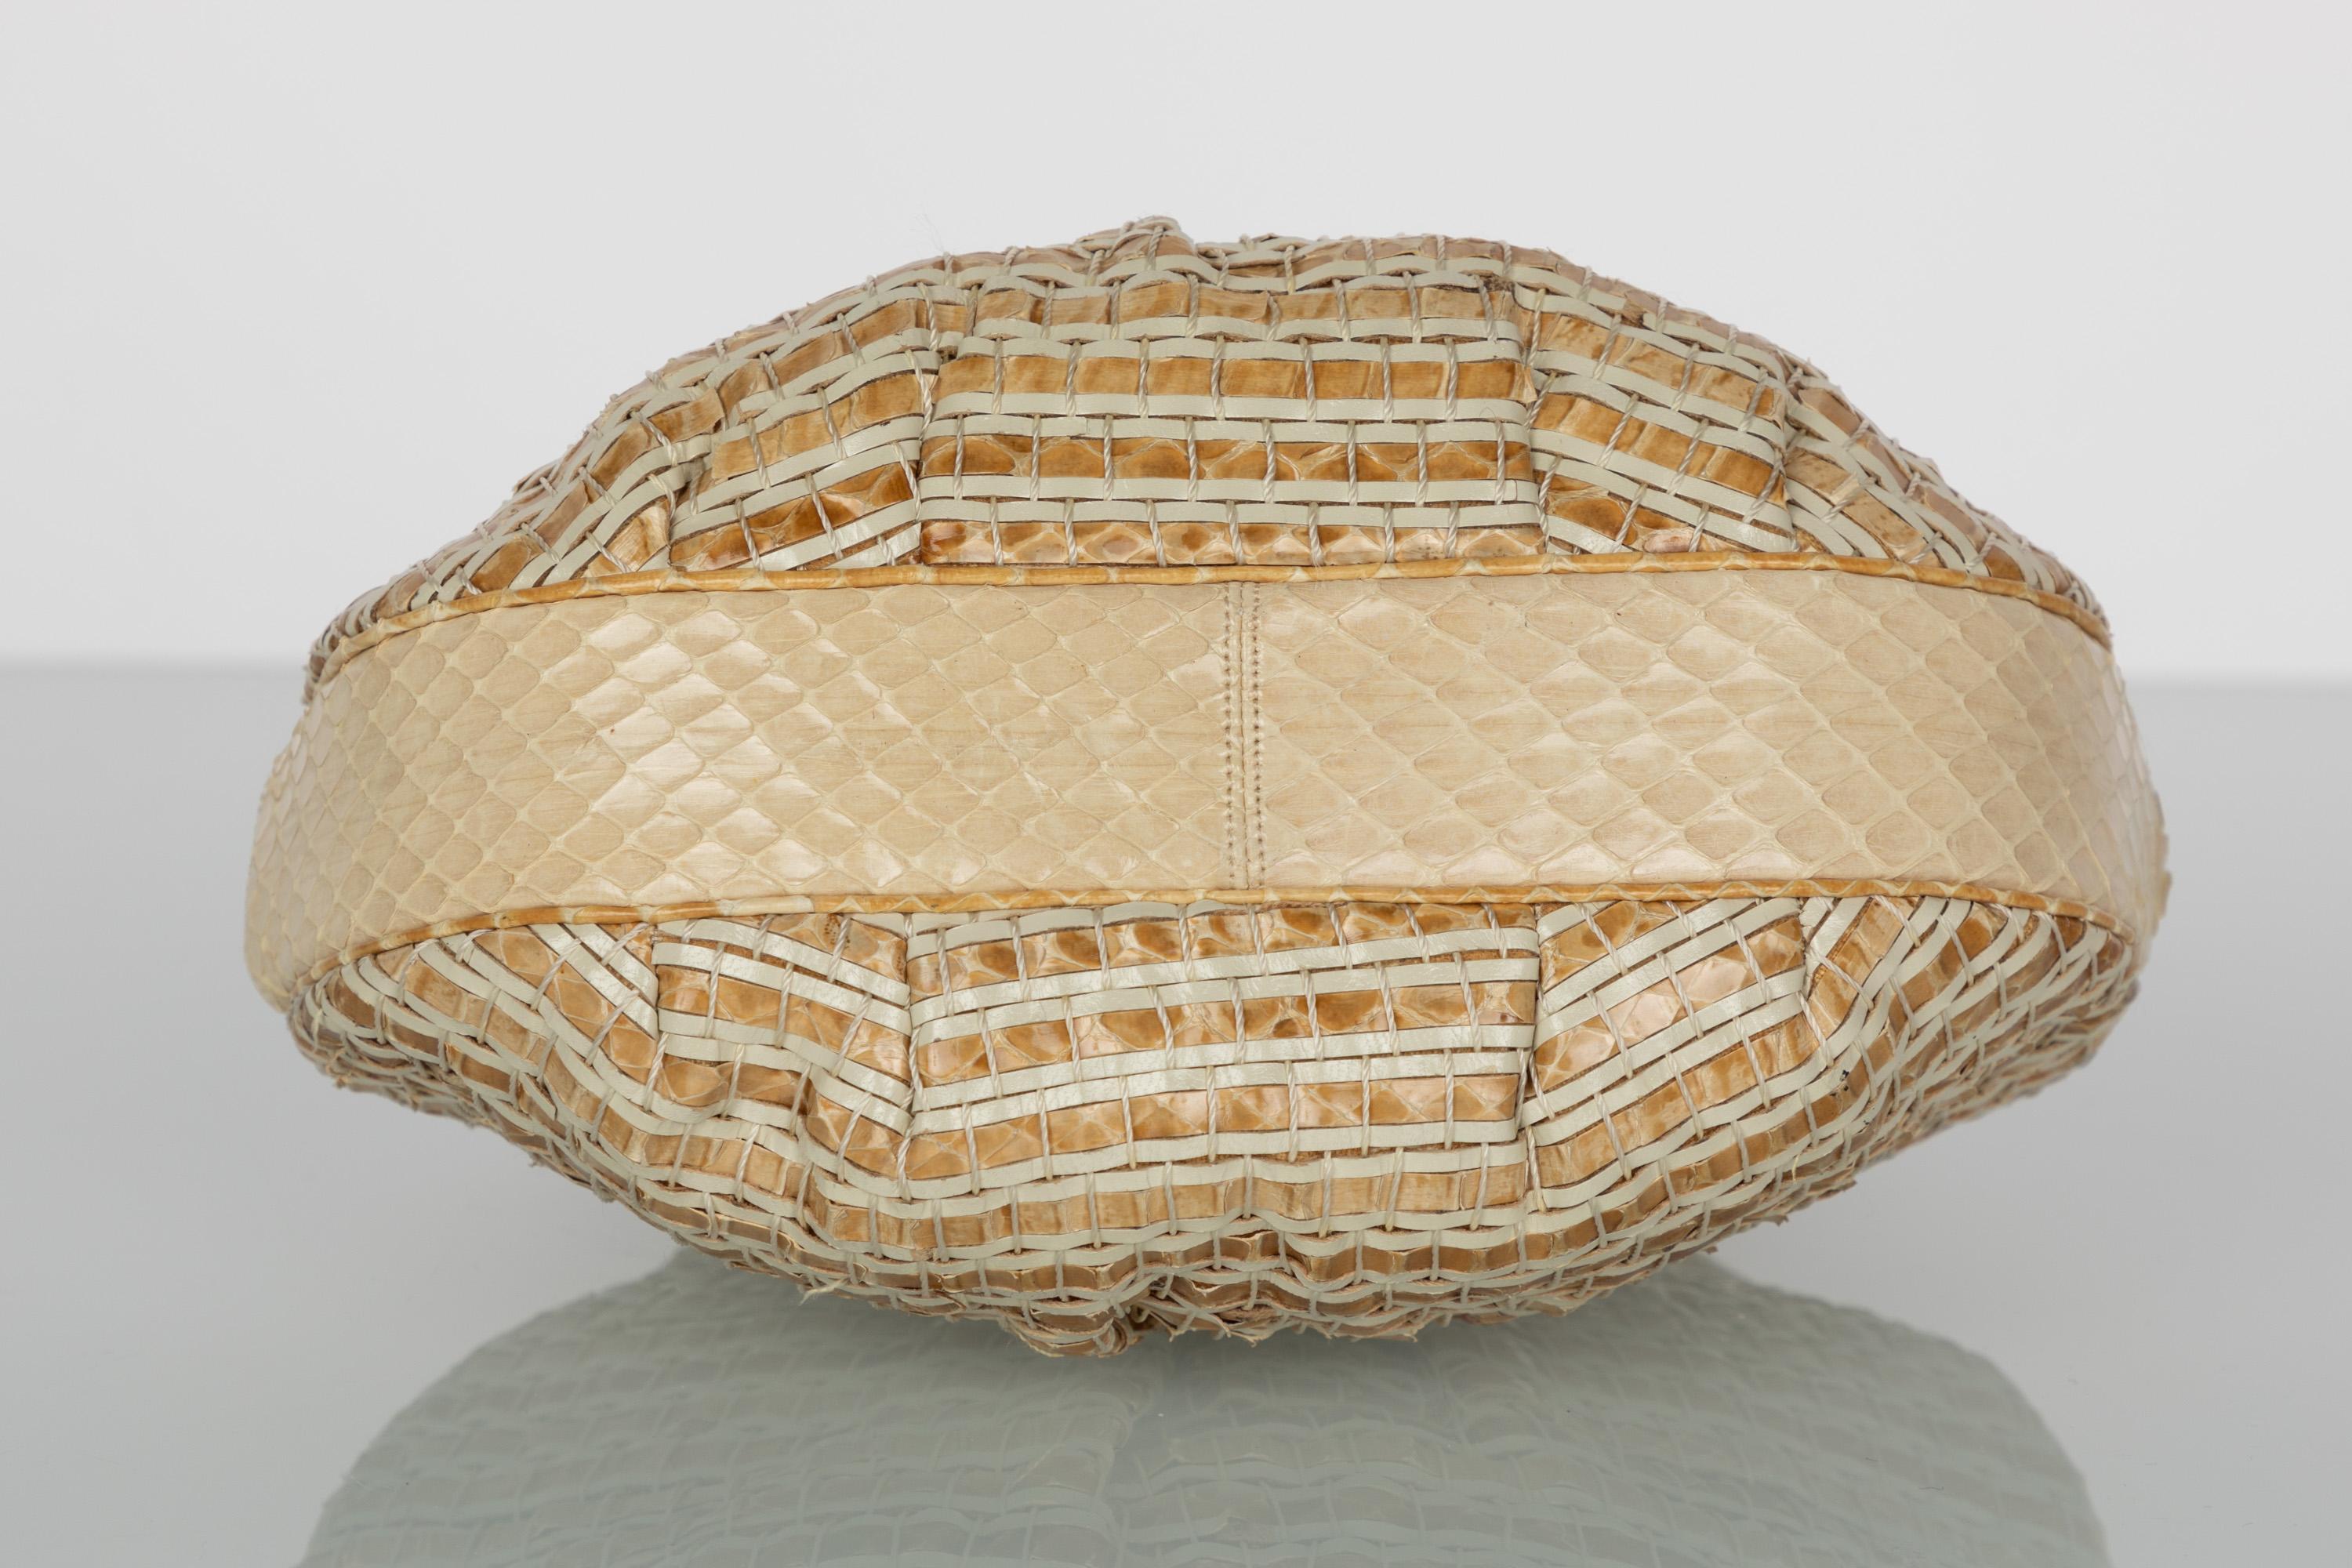  Judith Leiber Limited Edition Woven Snakeskin Clutch Bag For Sale 3